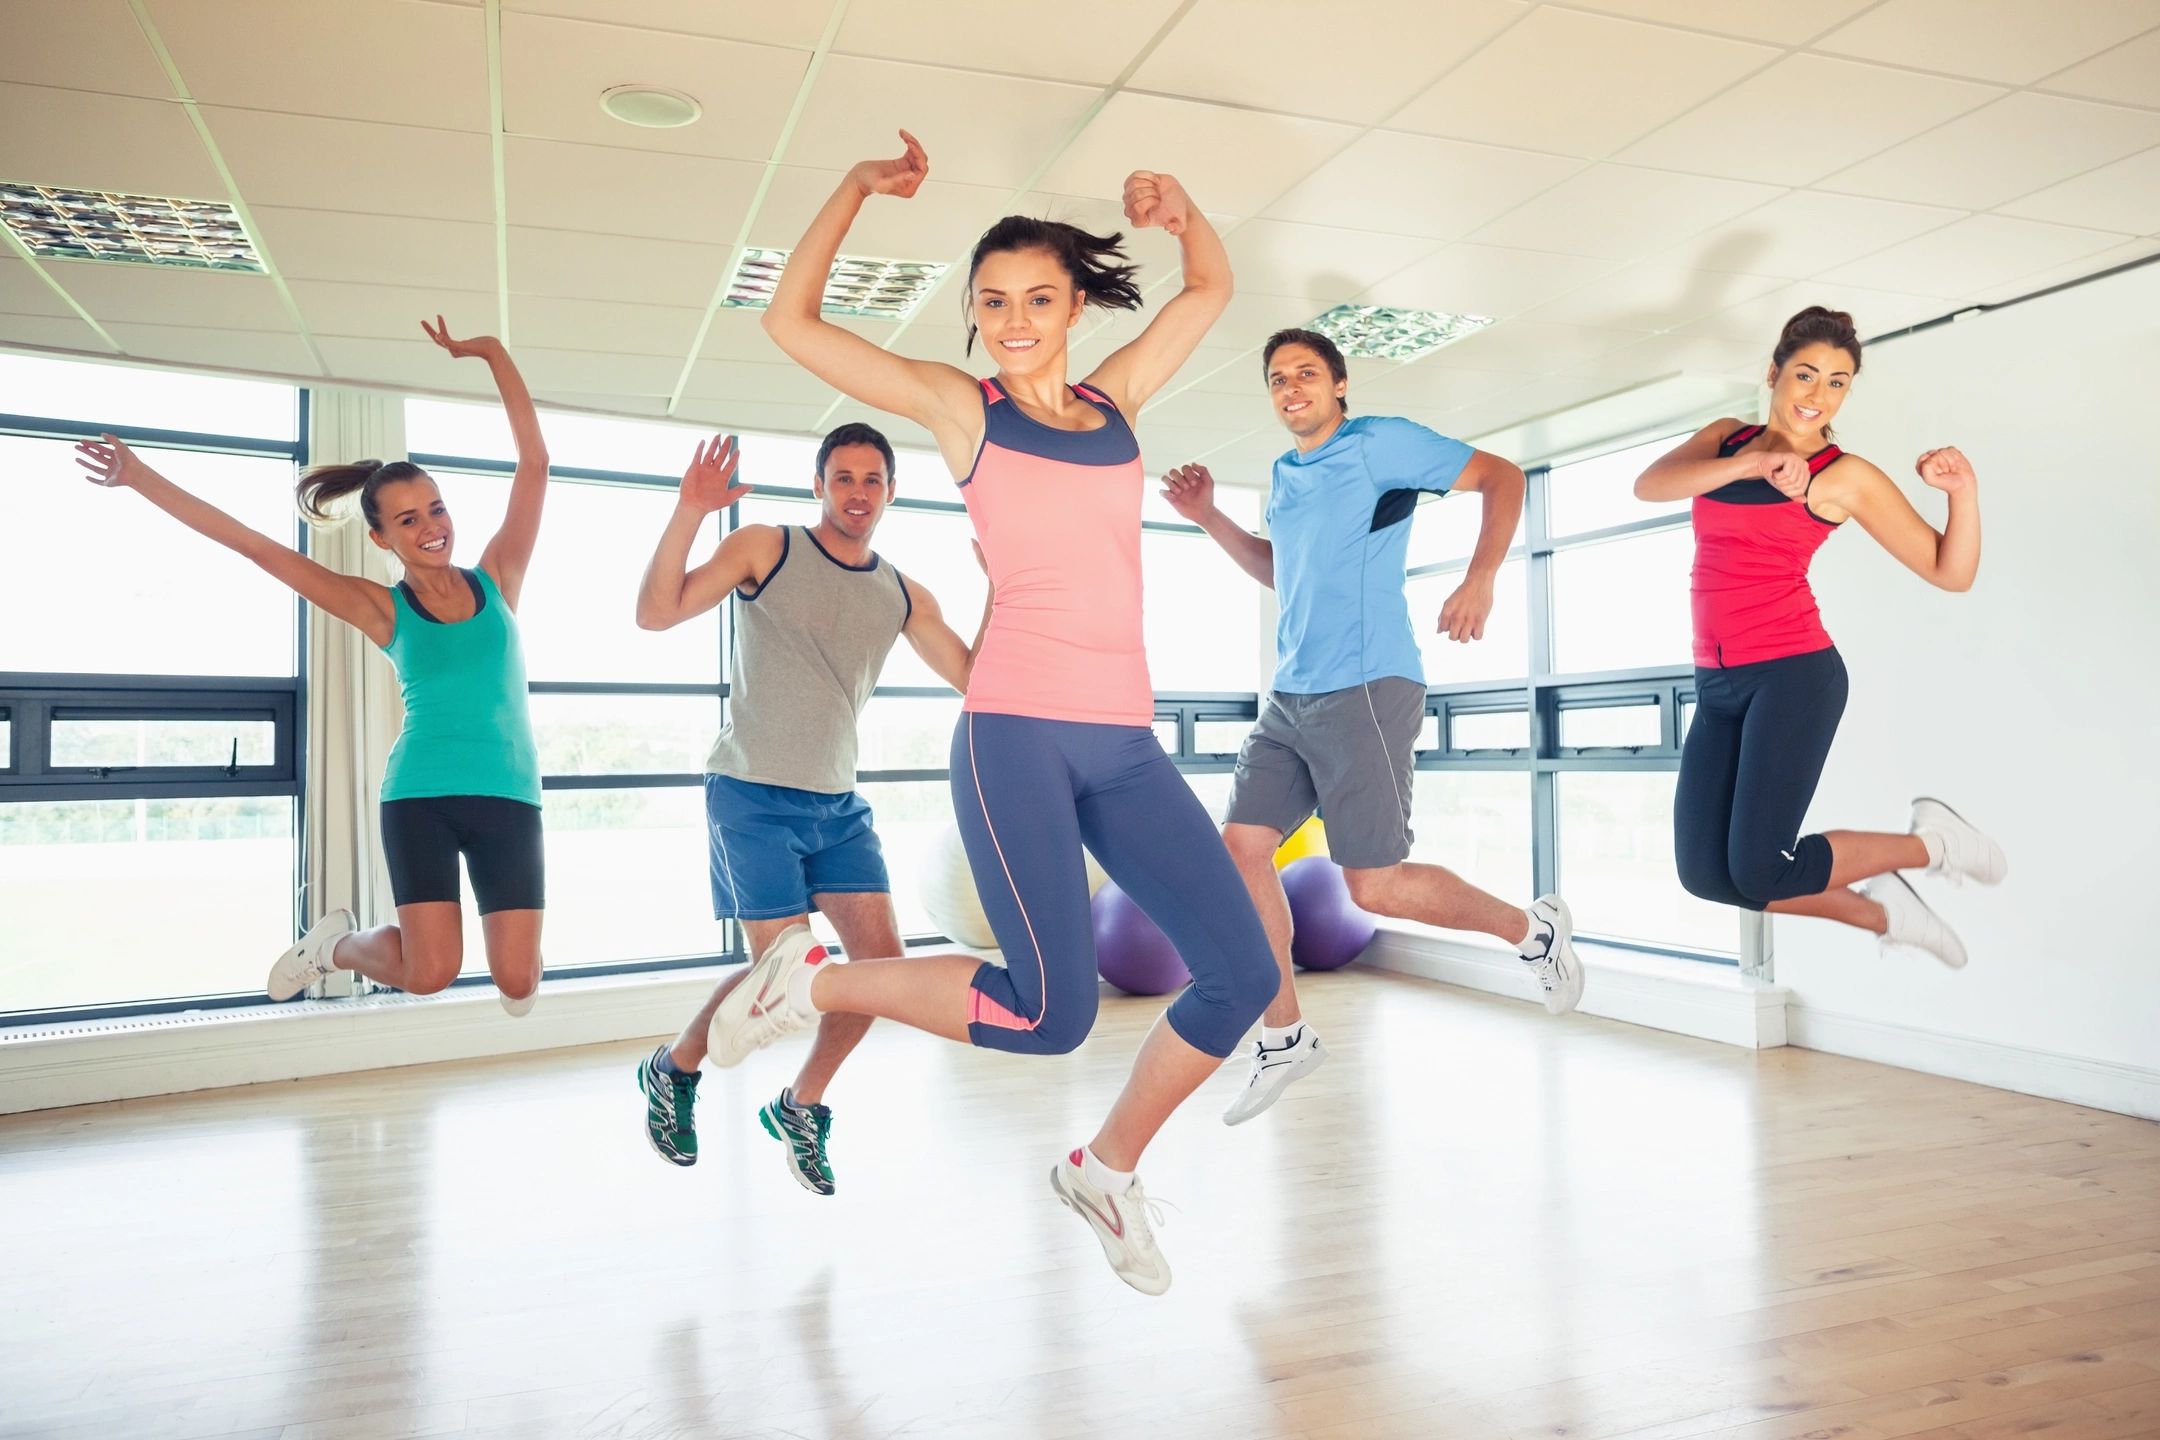 fitness in the workplace